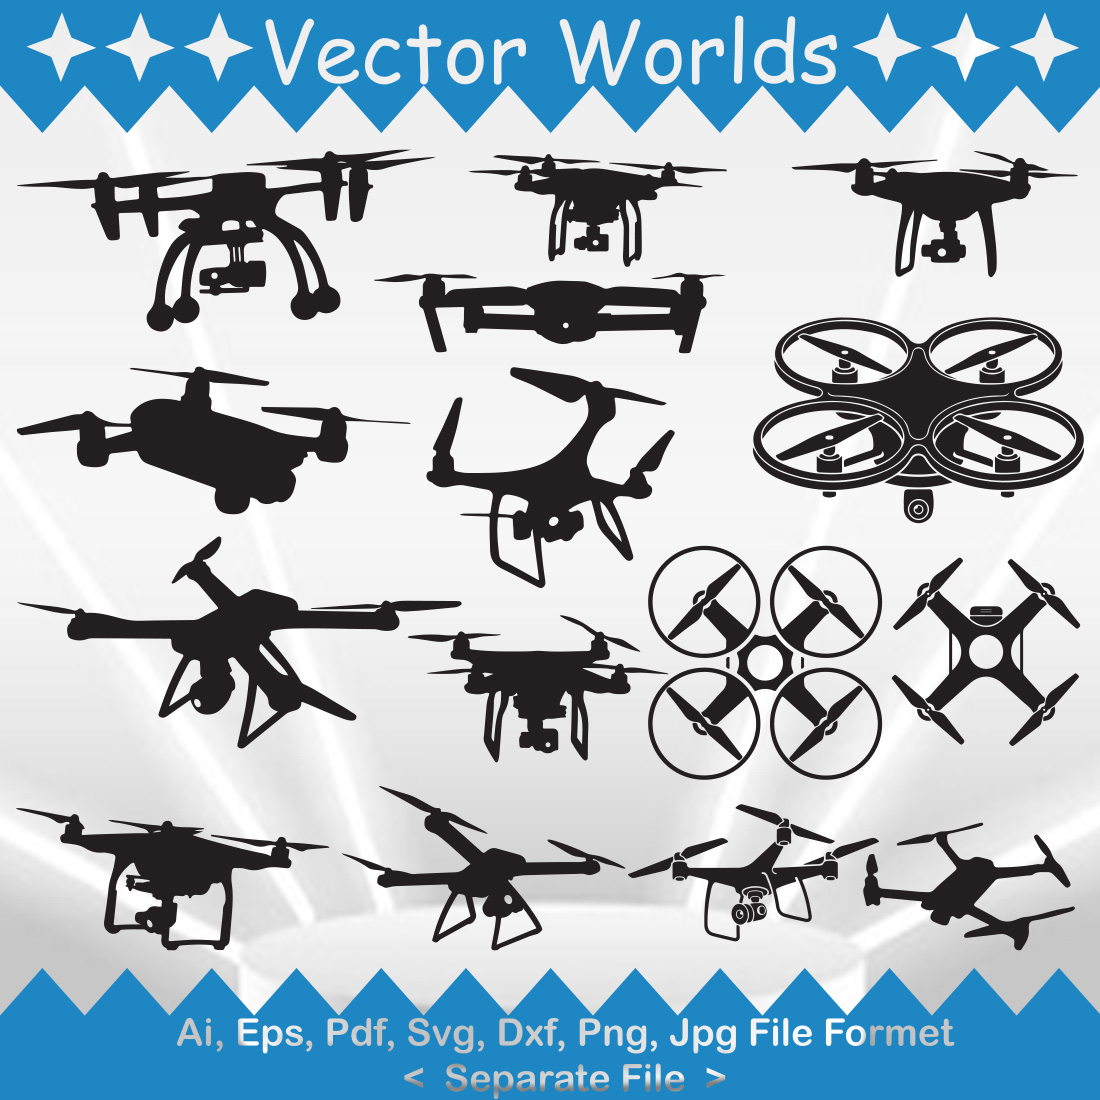 Pack of wonderful images of silhouettes of drones